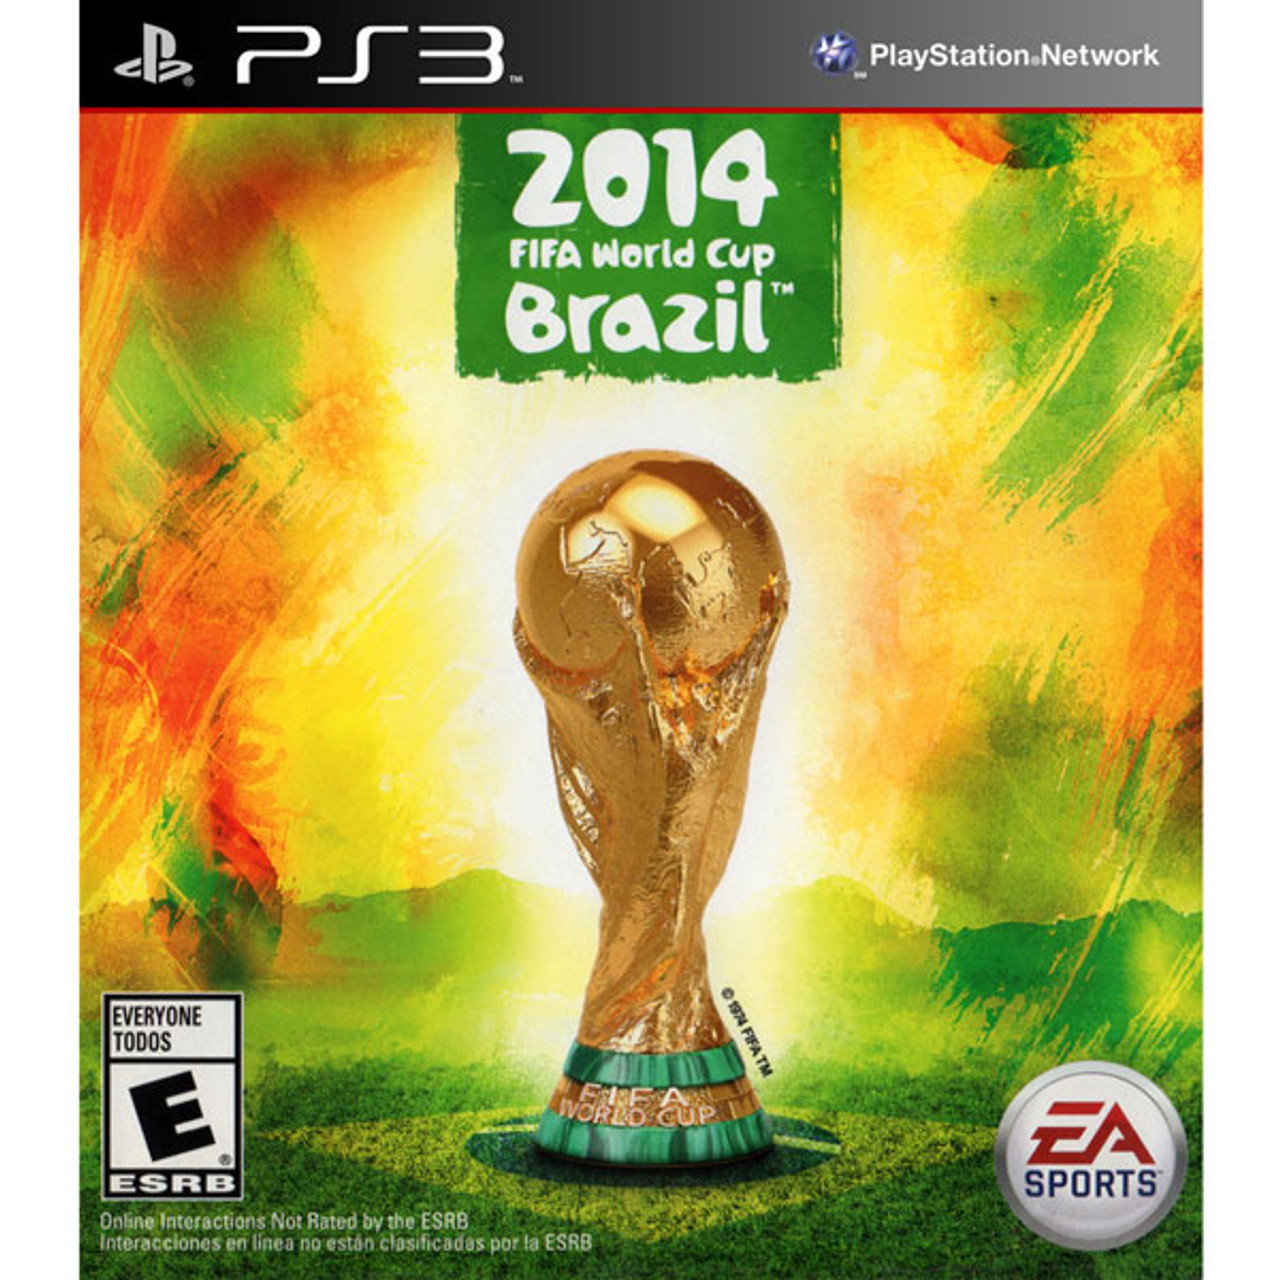 2014 Fifa World Cup Brazil Playstation 3 PS3 Game For Sale DKOldies